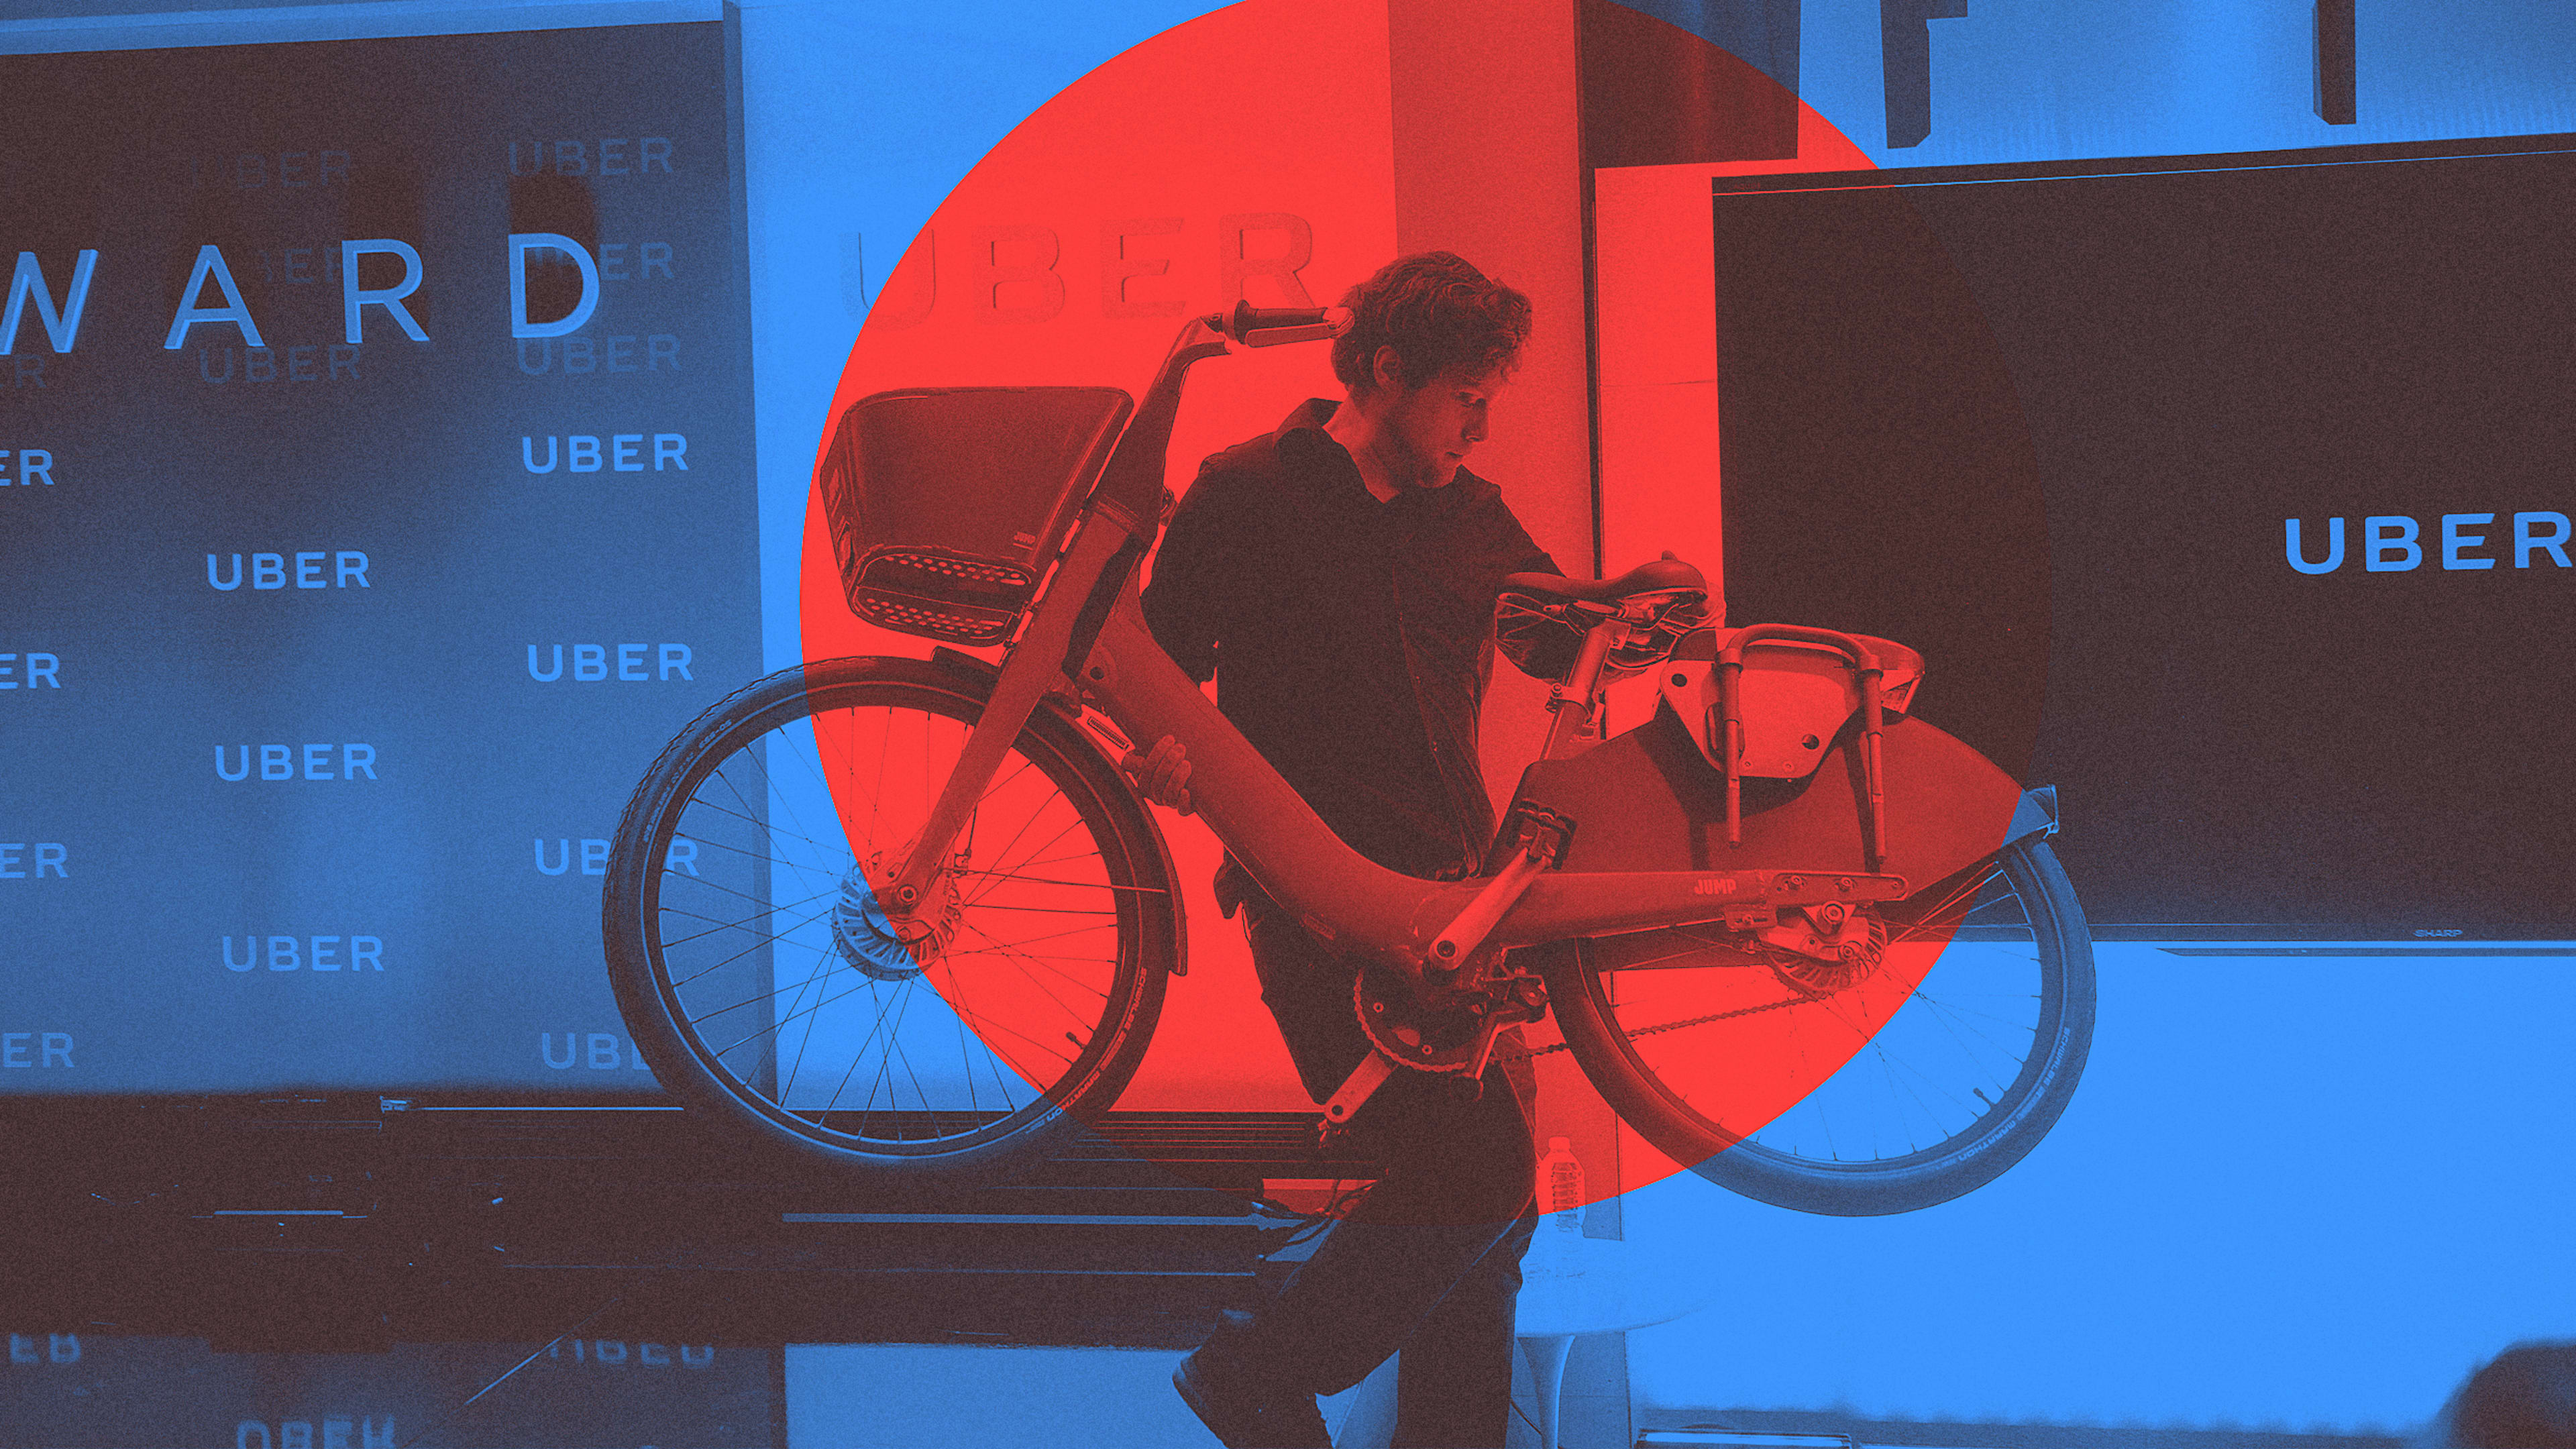 Uber just destroyed thousands of electric bikes